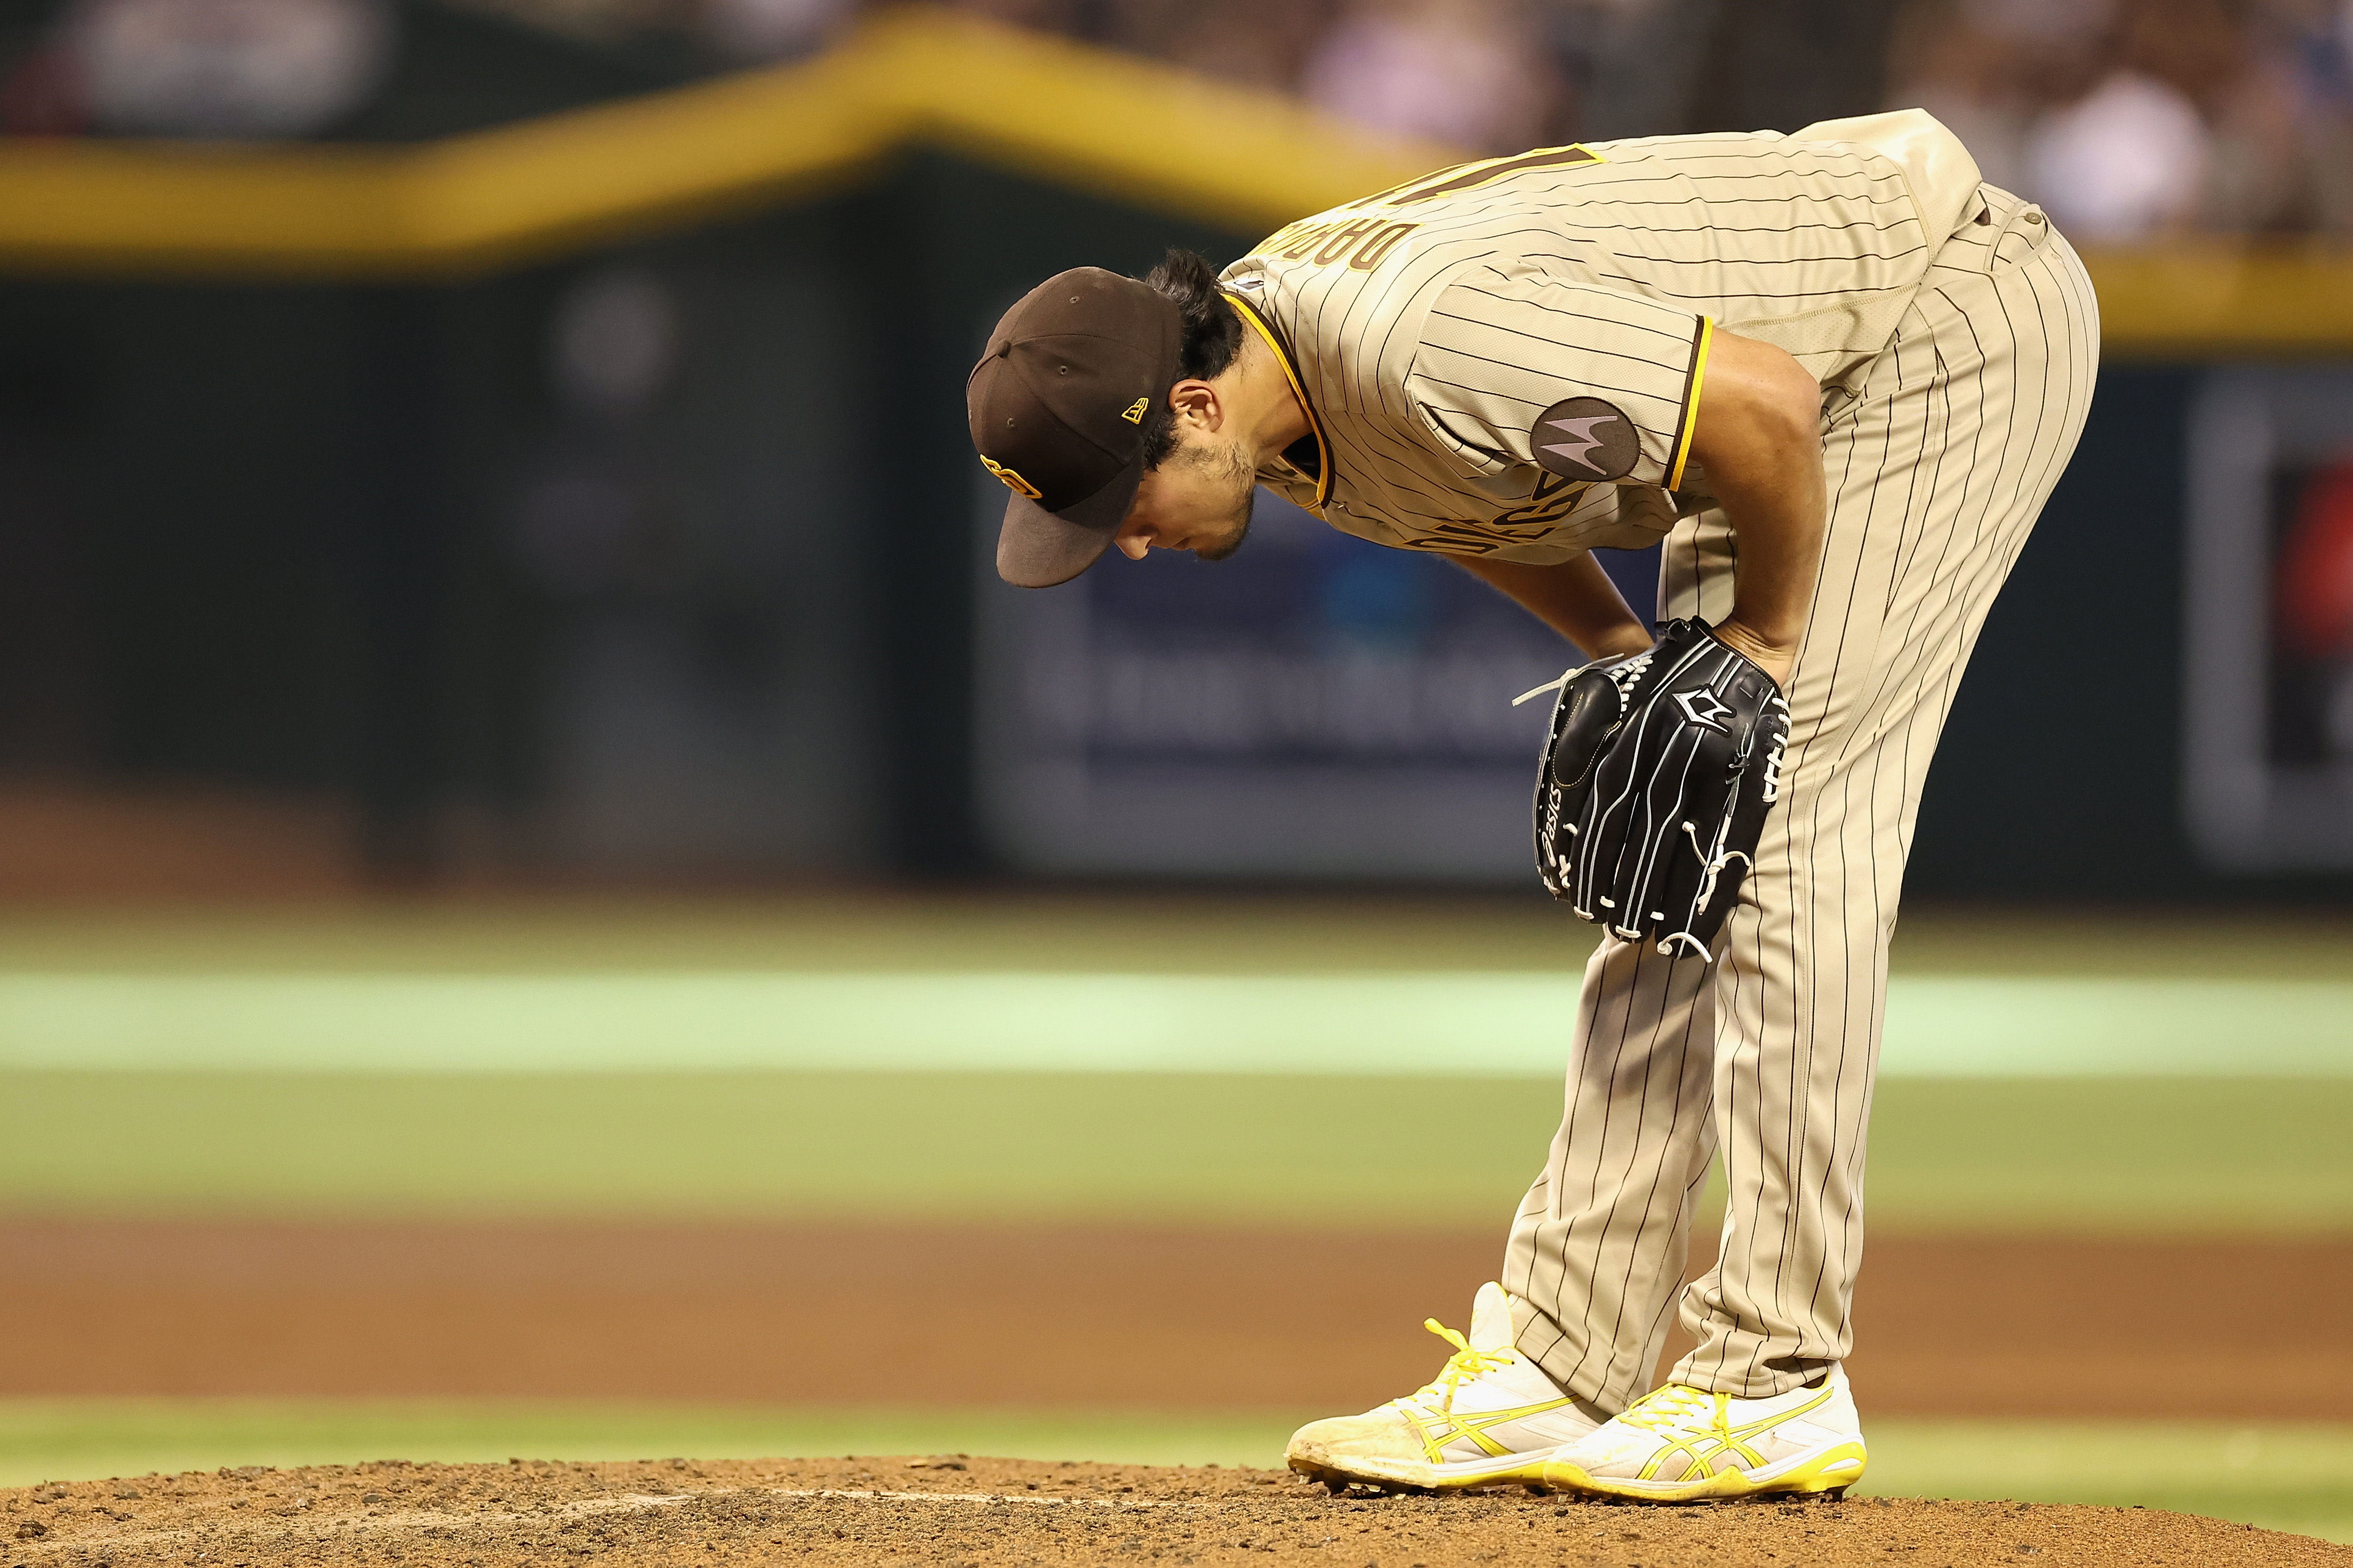 Yu Darvish injury: What happened to Yu Darvish? Padres star pitcher  announced as last minute scratch against Pirates